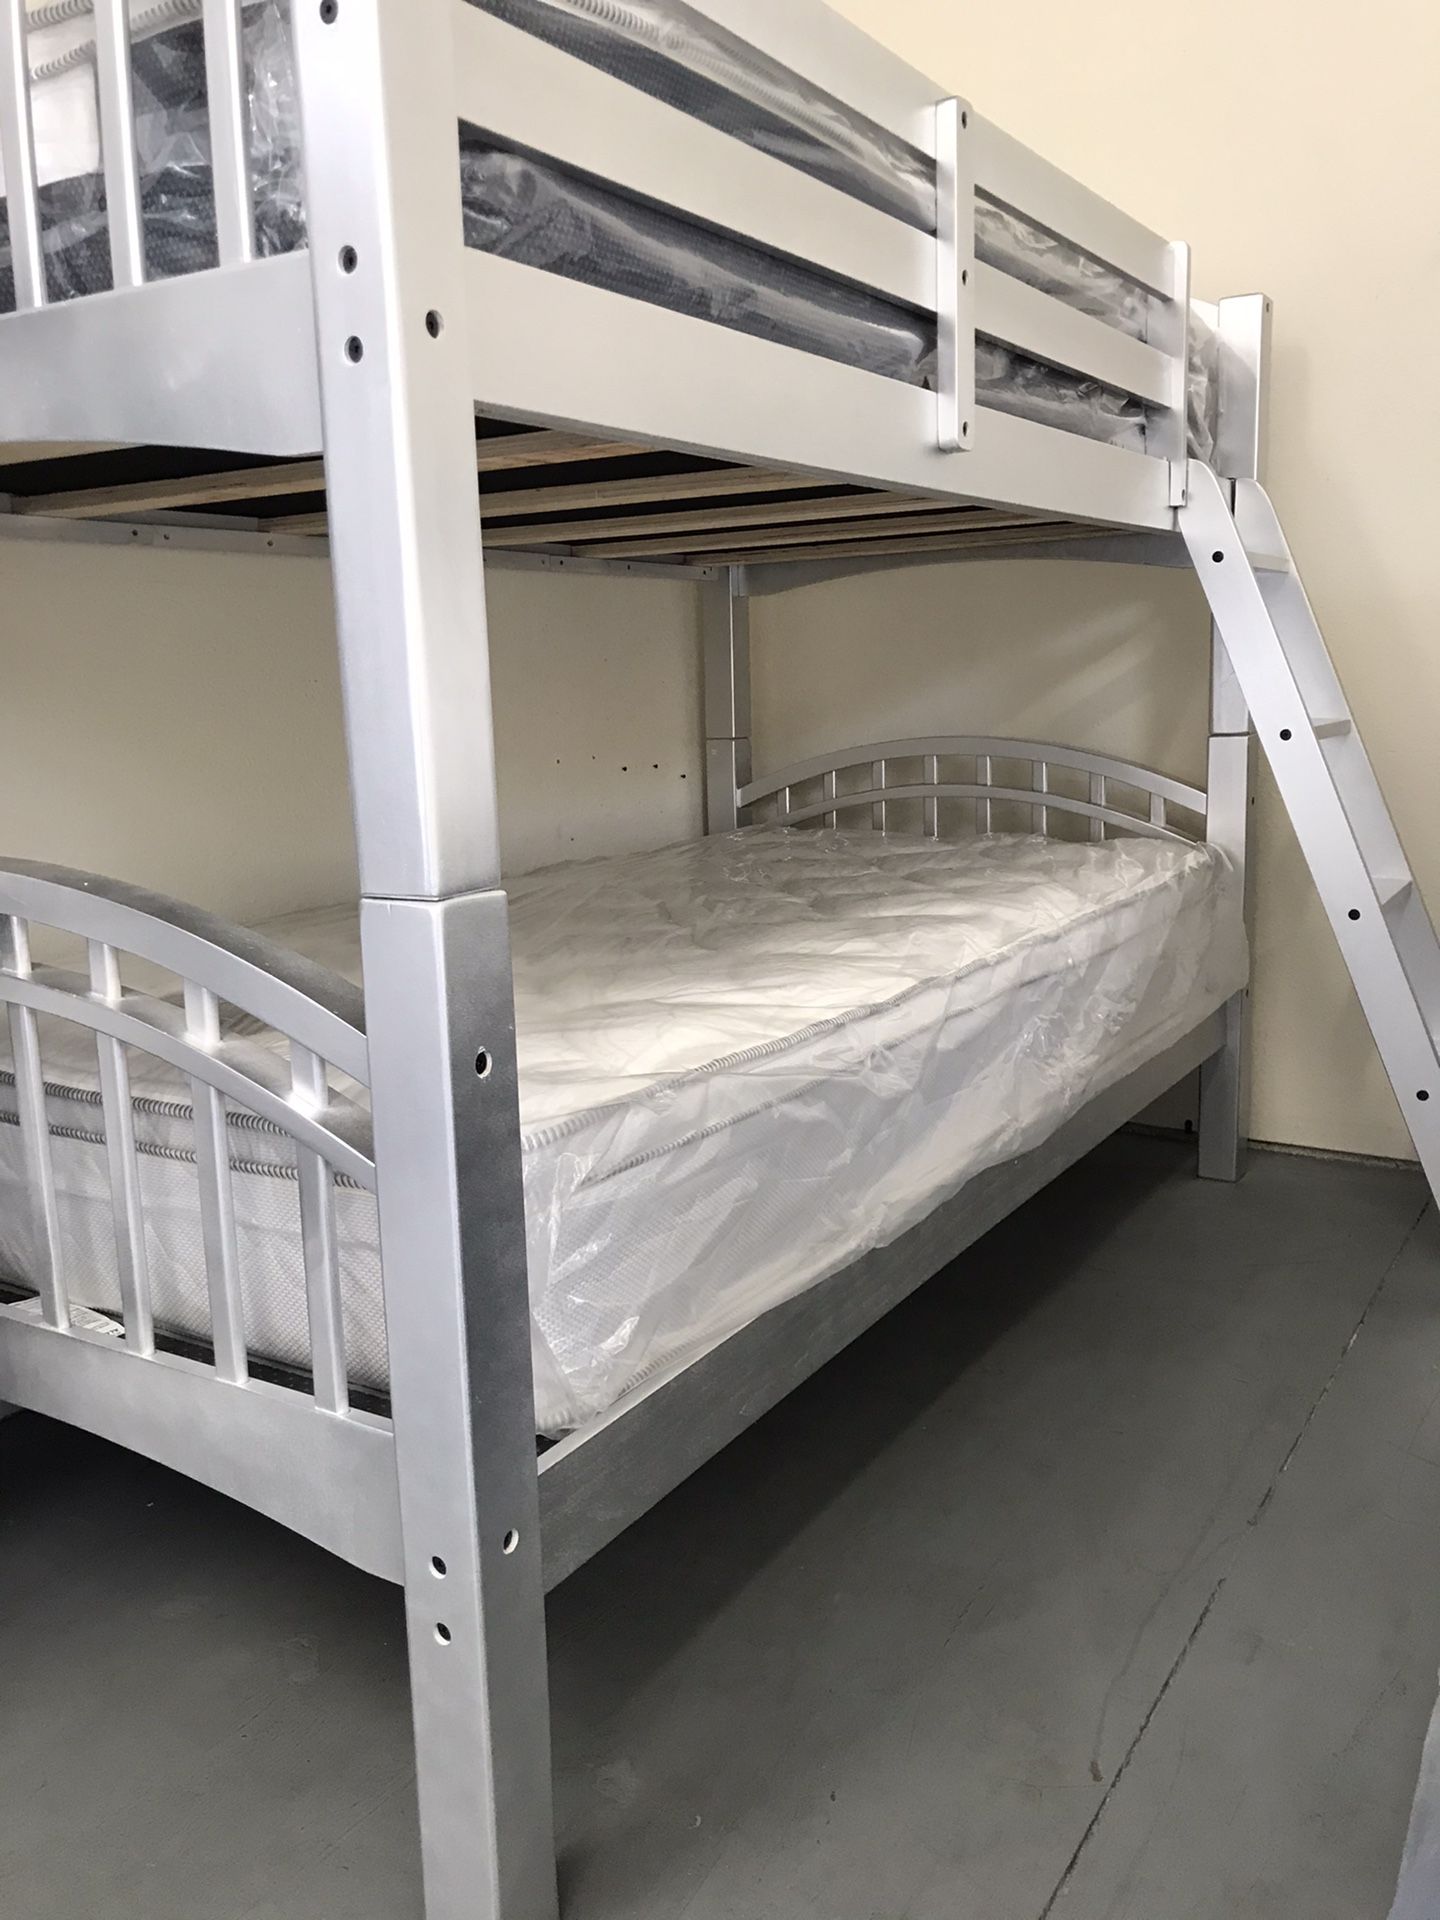 Brand new TWIN size Bunk Bed Frame